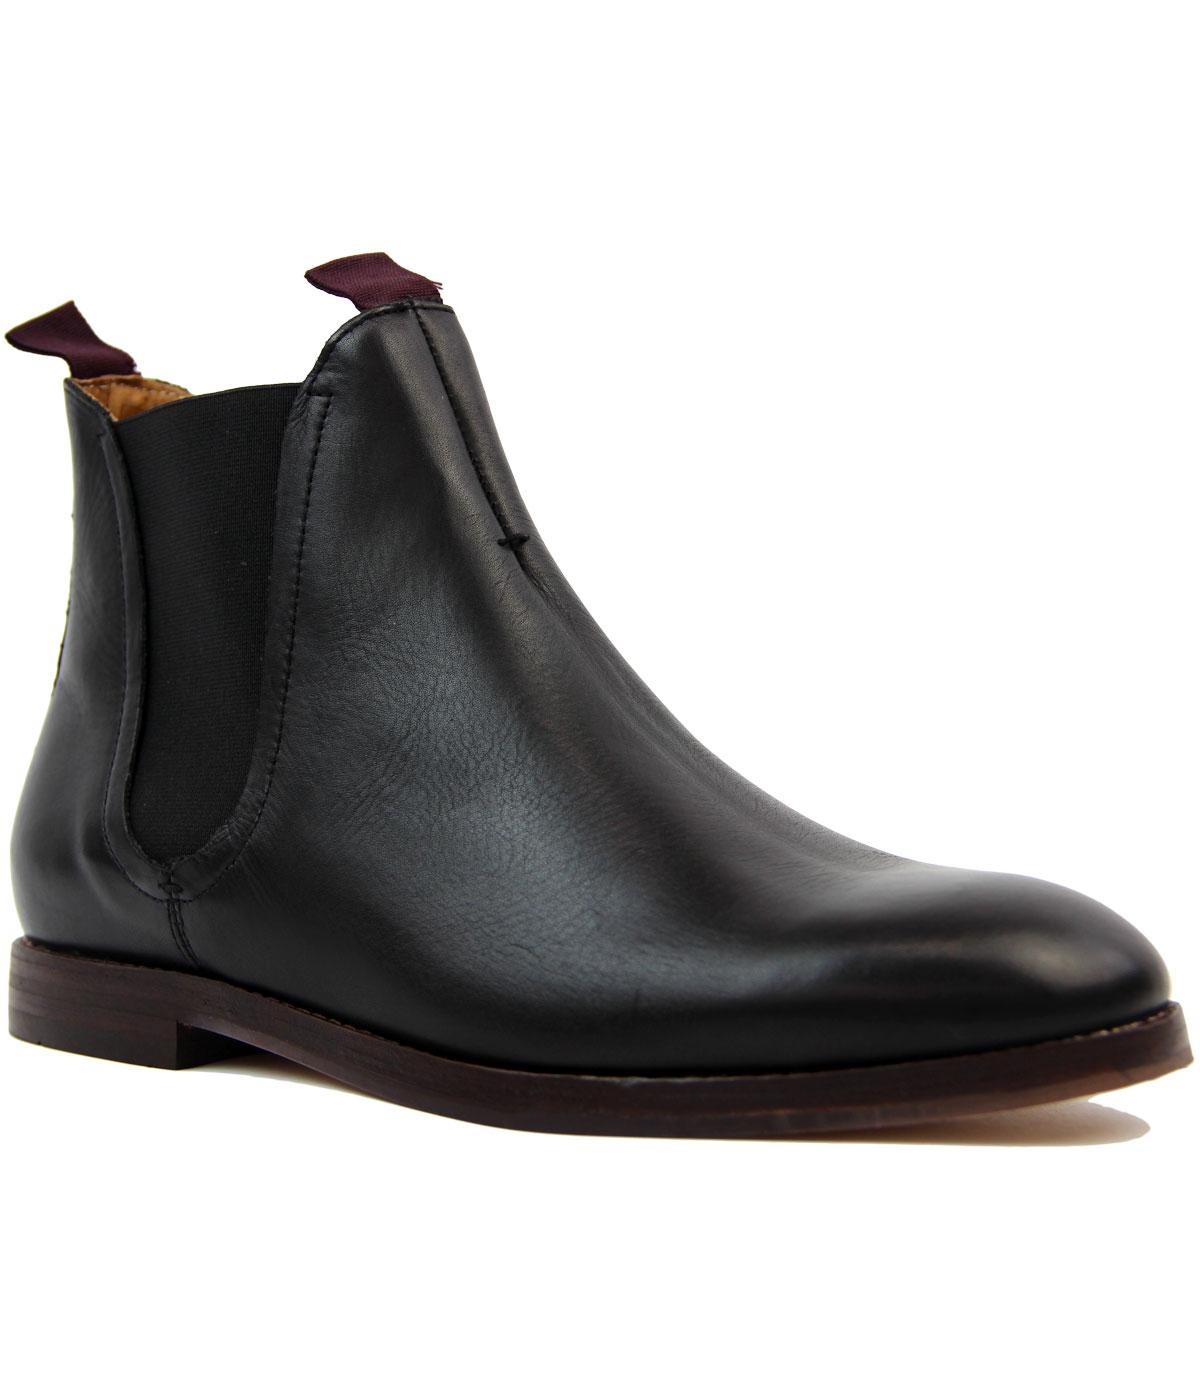 H BY HUDSON Tamper Retro Mod Smooth Leather Chelsea Boots Black